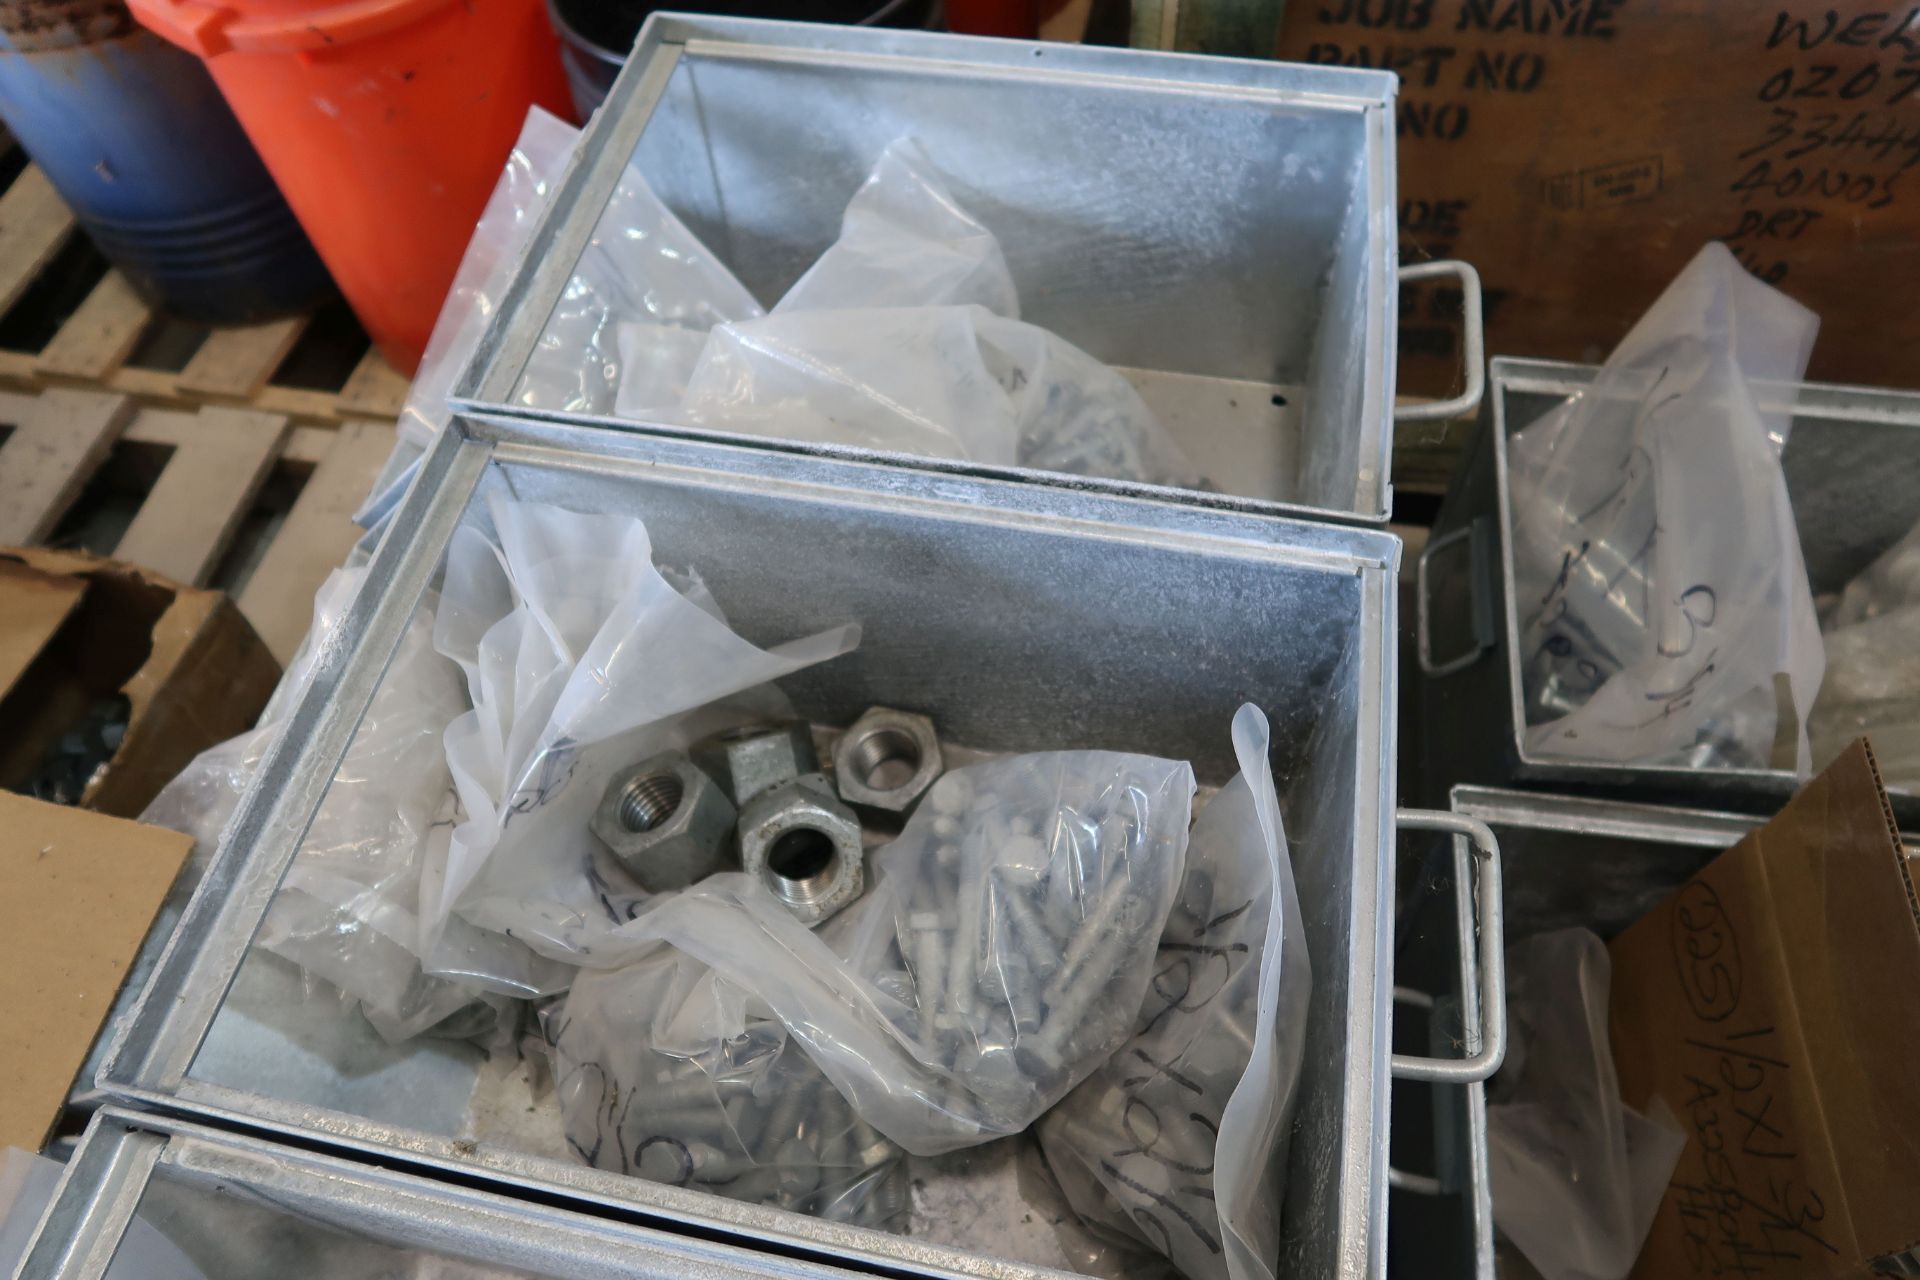 SKID MISCELLANEOUS GALVANIZED TOWER COMPONENTS AND HARDWARE - Image 4 of 4